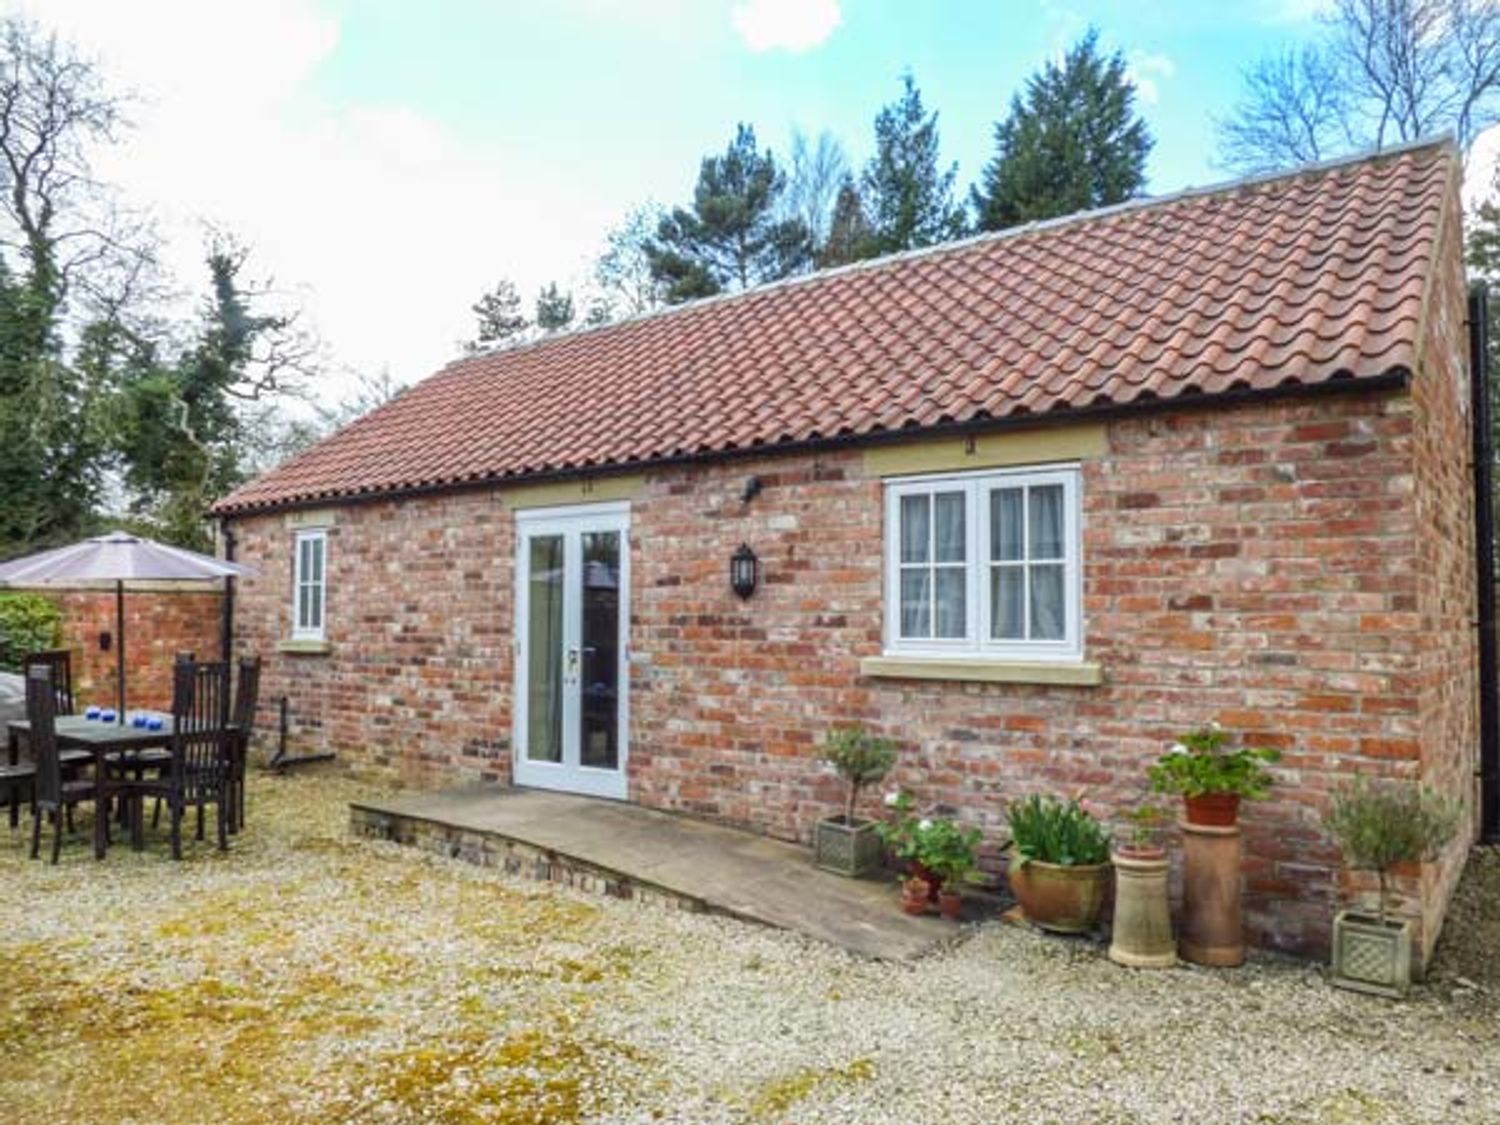 Stable Cottage - North Yorkshire (incl. Whitby) - 21723 - photo 1